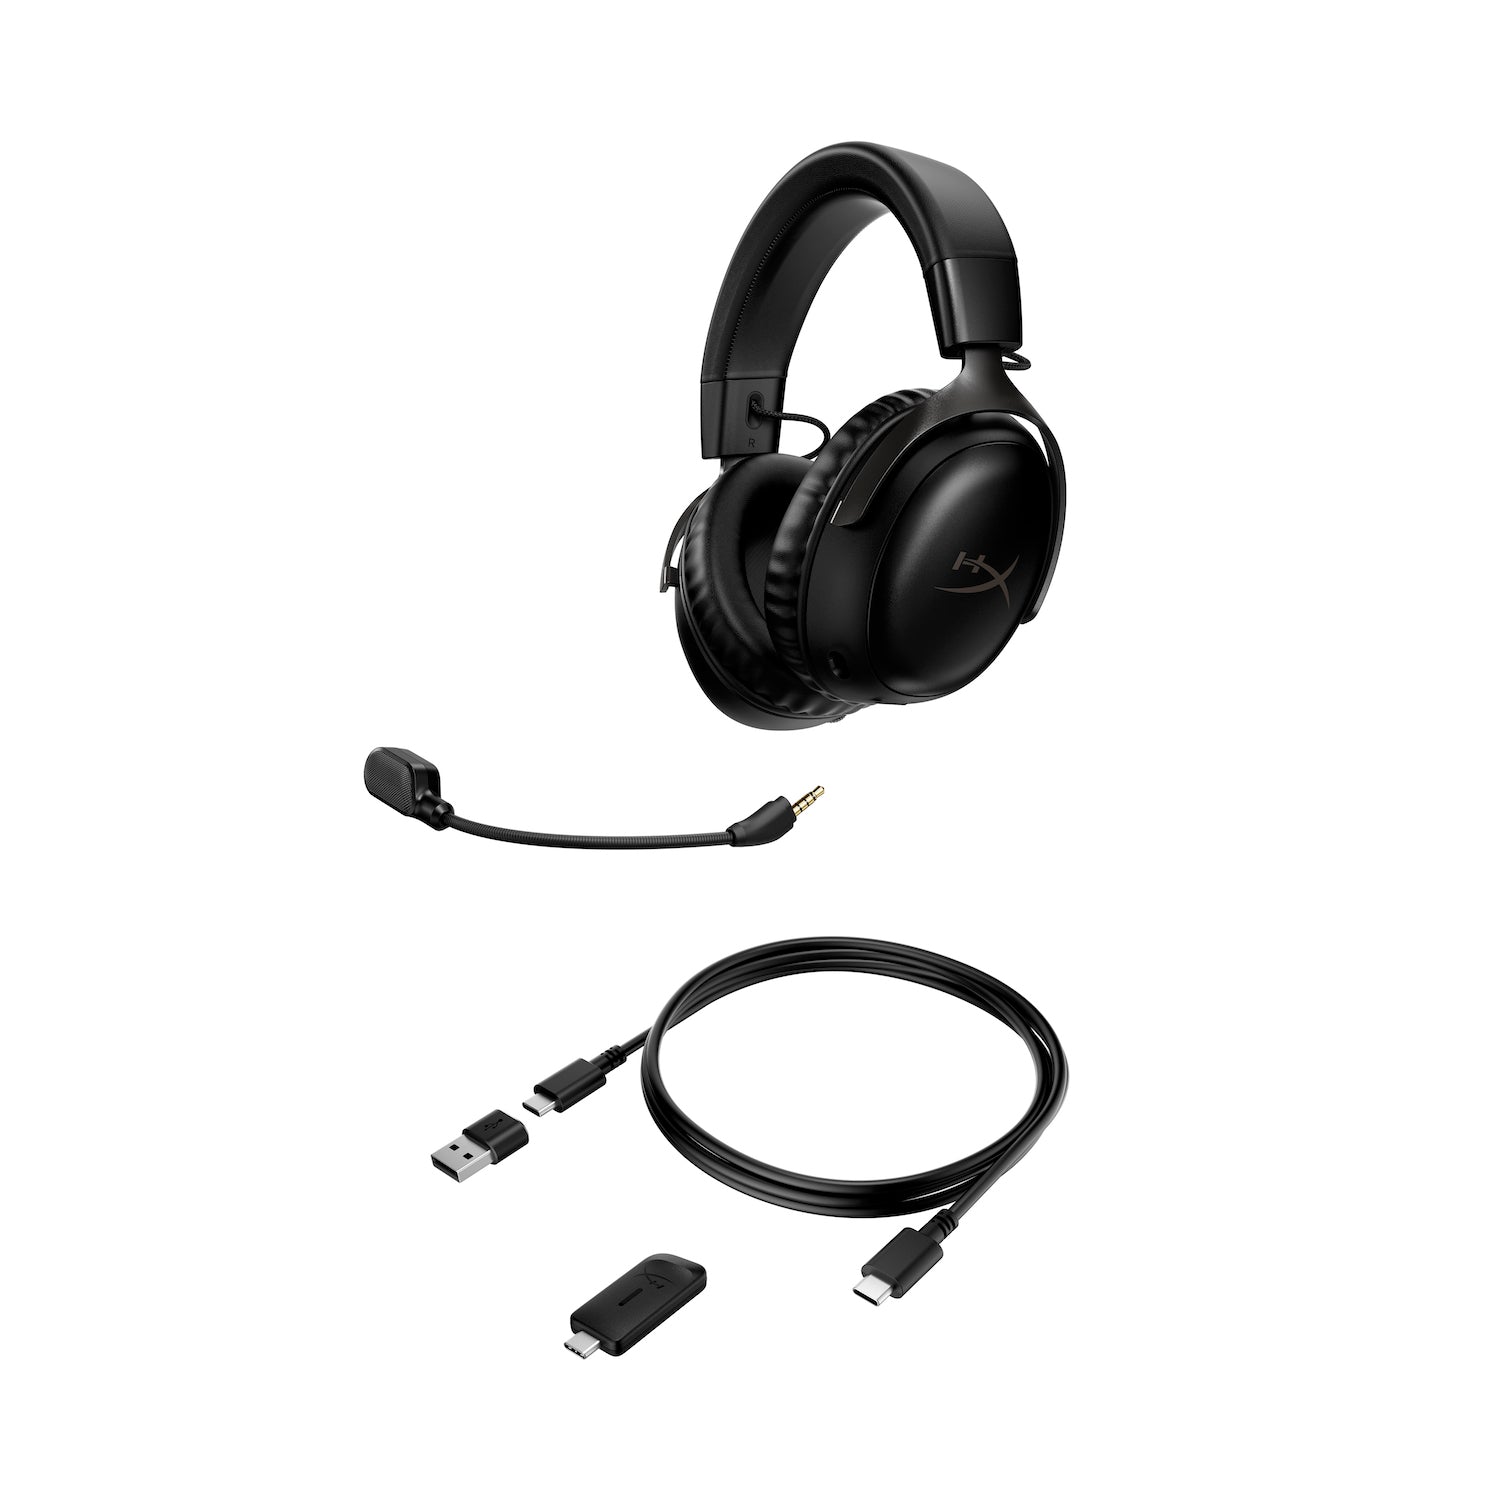 HyperX Cloud III Wireless Black Gaming Headset - main angled view pointing to the left side featuring accessories